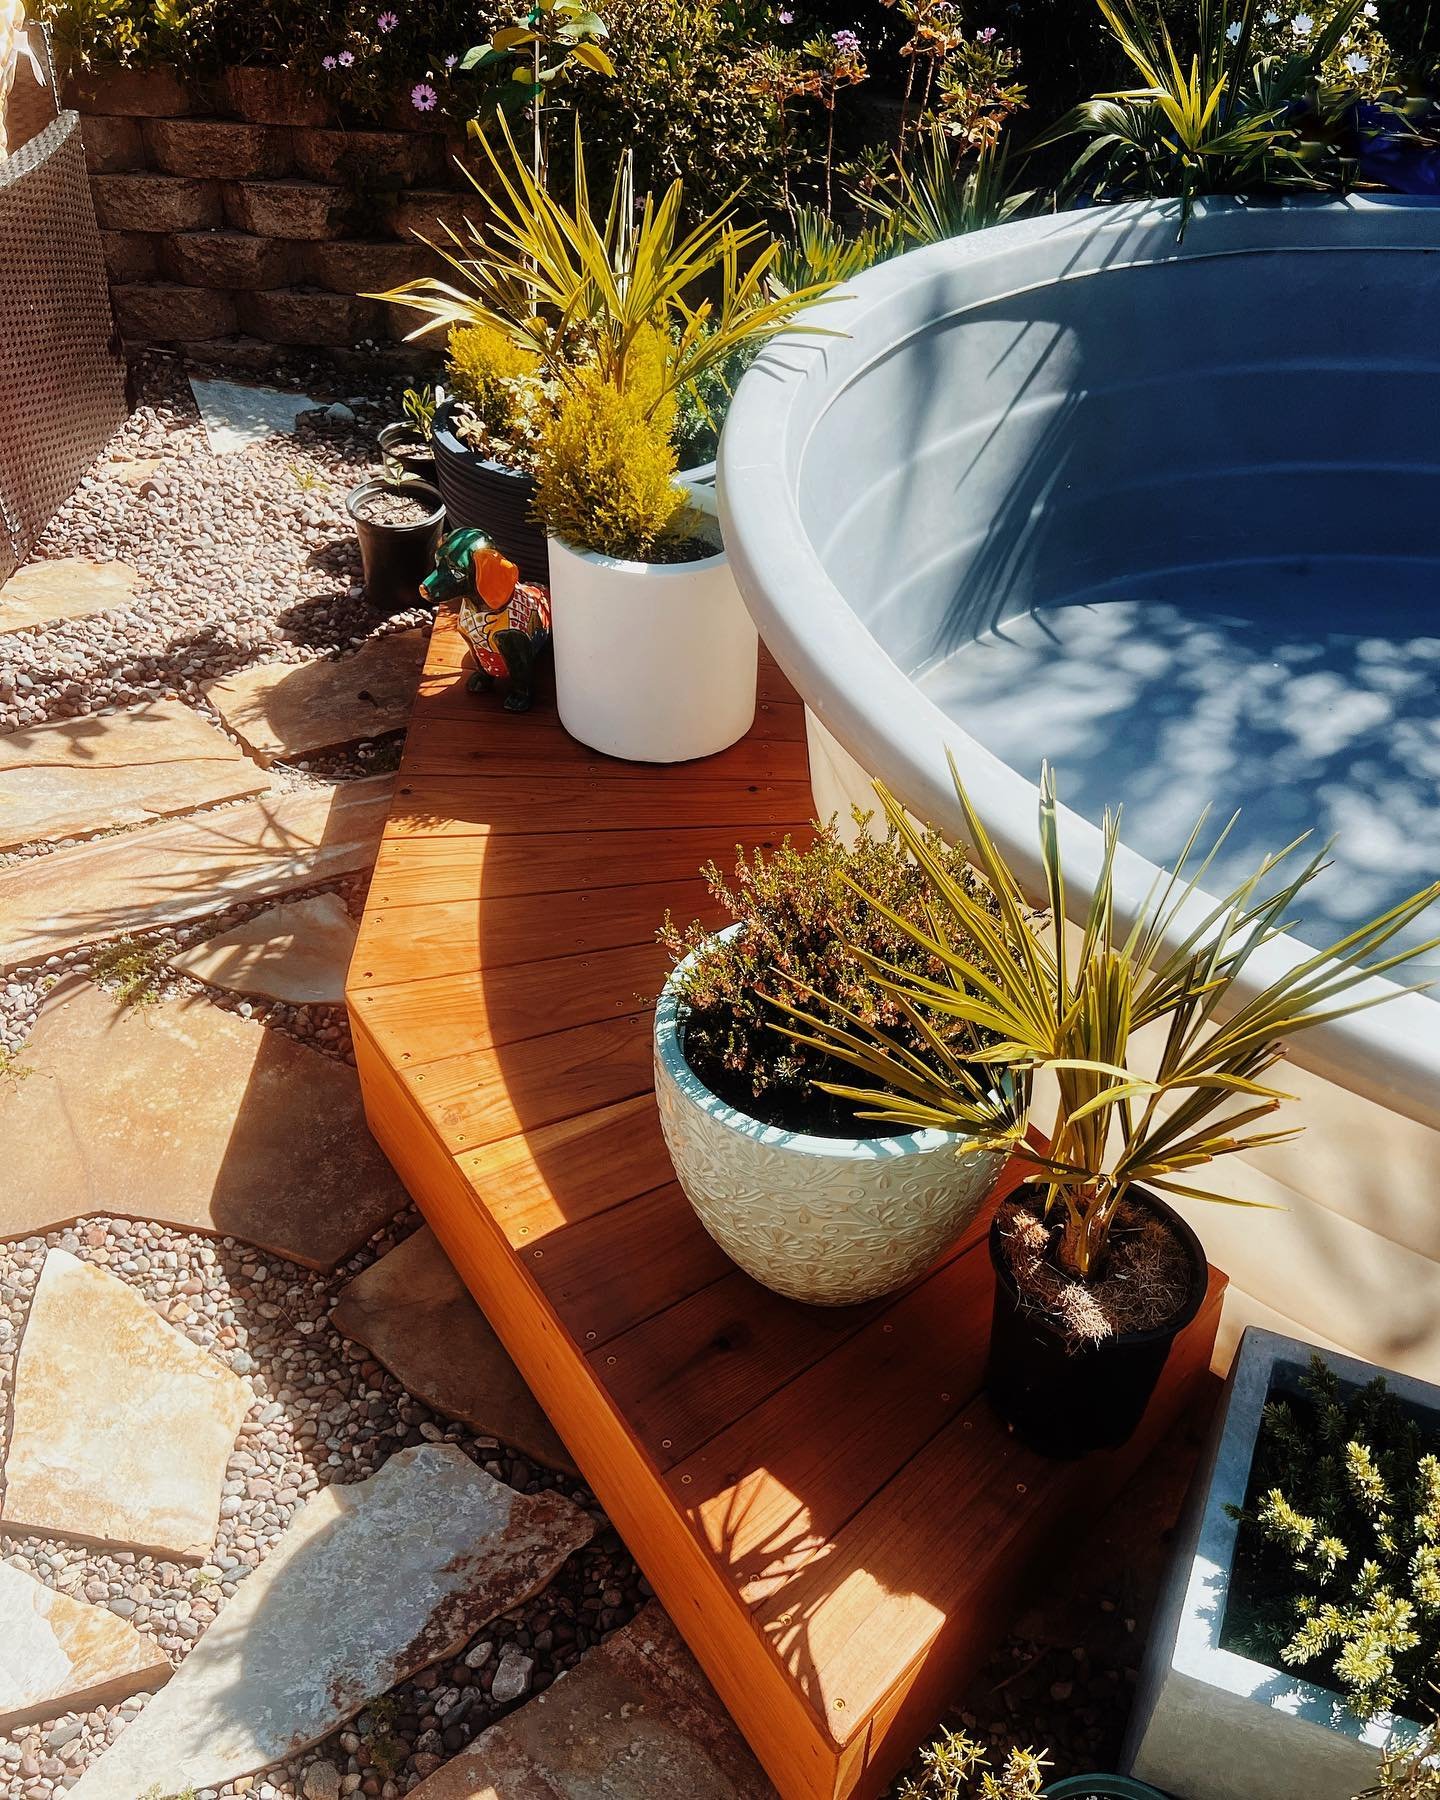 STEP into your Private Sunny Oasis☀️. 
Featuring:
🔸Tipsy Step
🔸Stock Tank Poly Pool 
🔸 Delivered and Installed in San Diego, CA

Soak Sooner for Less! DM us for more info. 

#tipsytankpools #minipool #stocktankpool #polystocktankpool #8ftpoly #sto